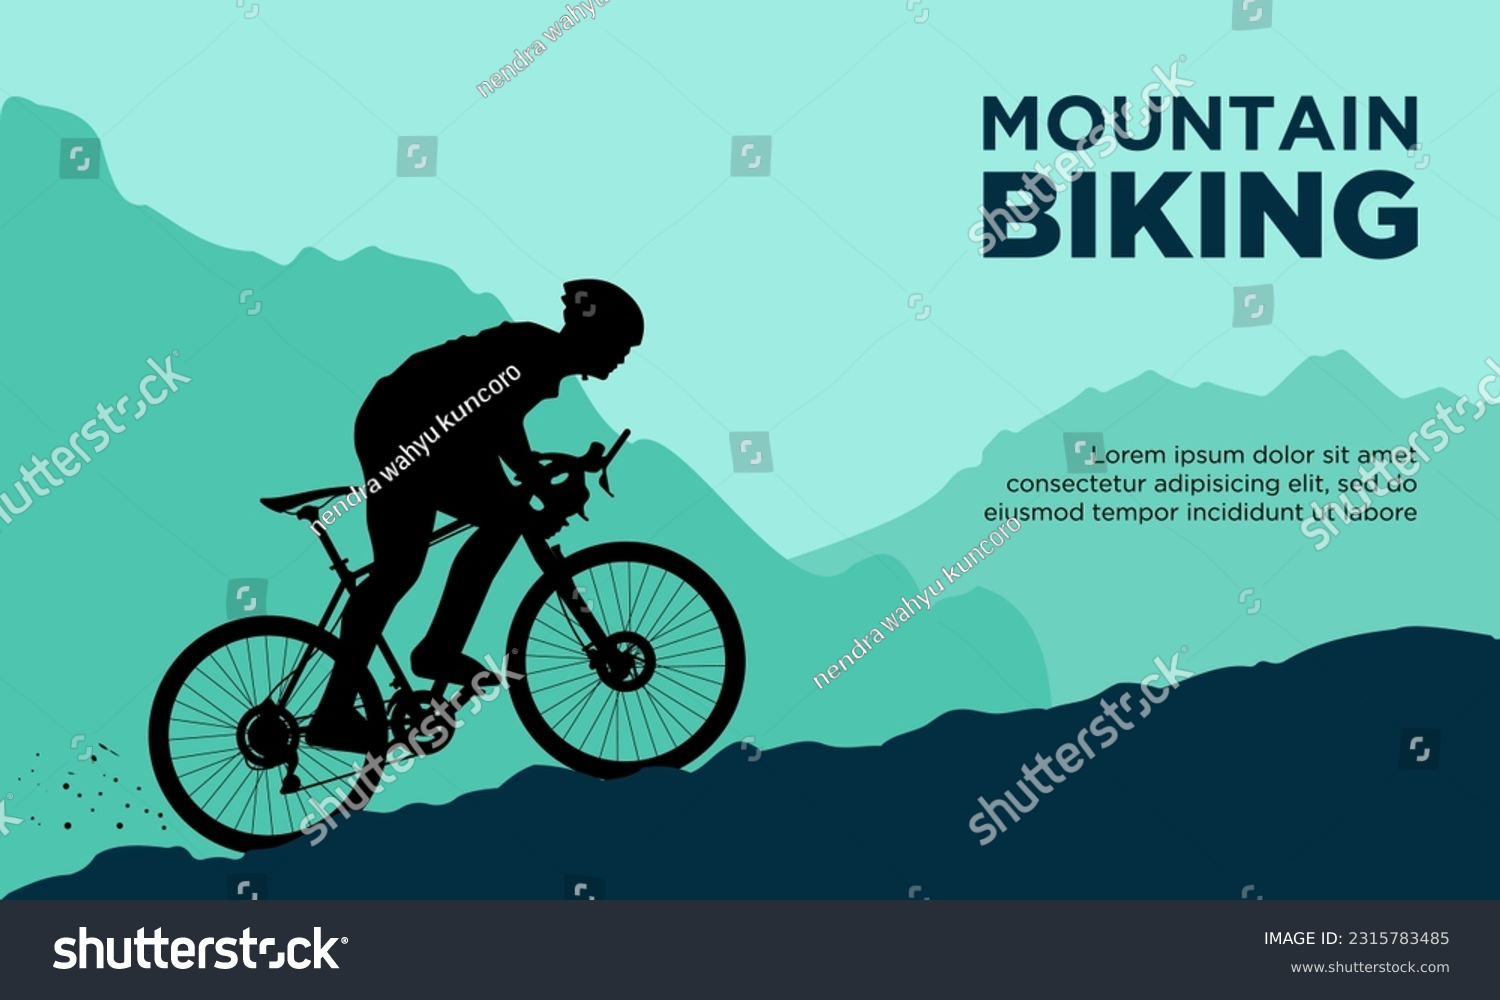 Mountain biking vector illustration. Suitable for mountain bike, downhill, and off road cycling. #2315783485